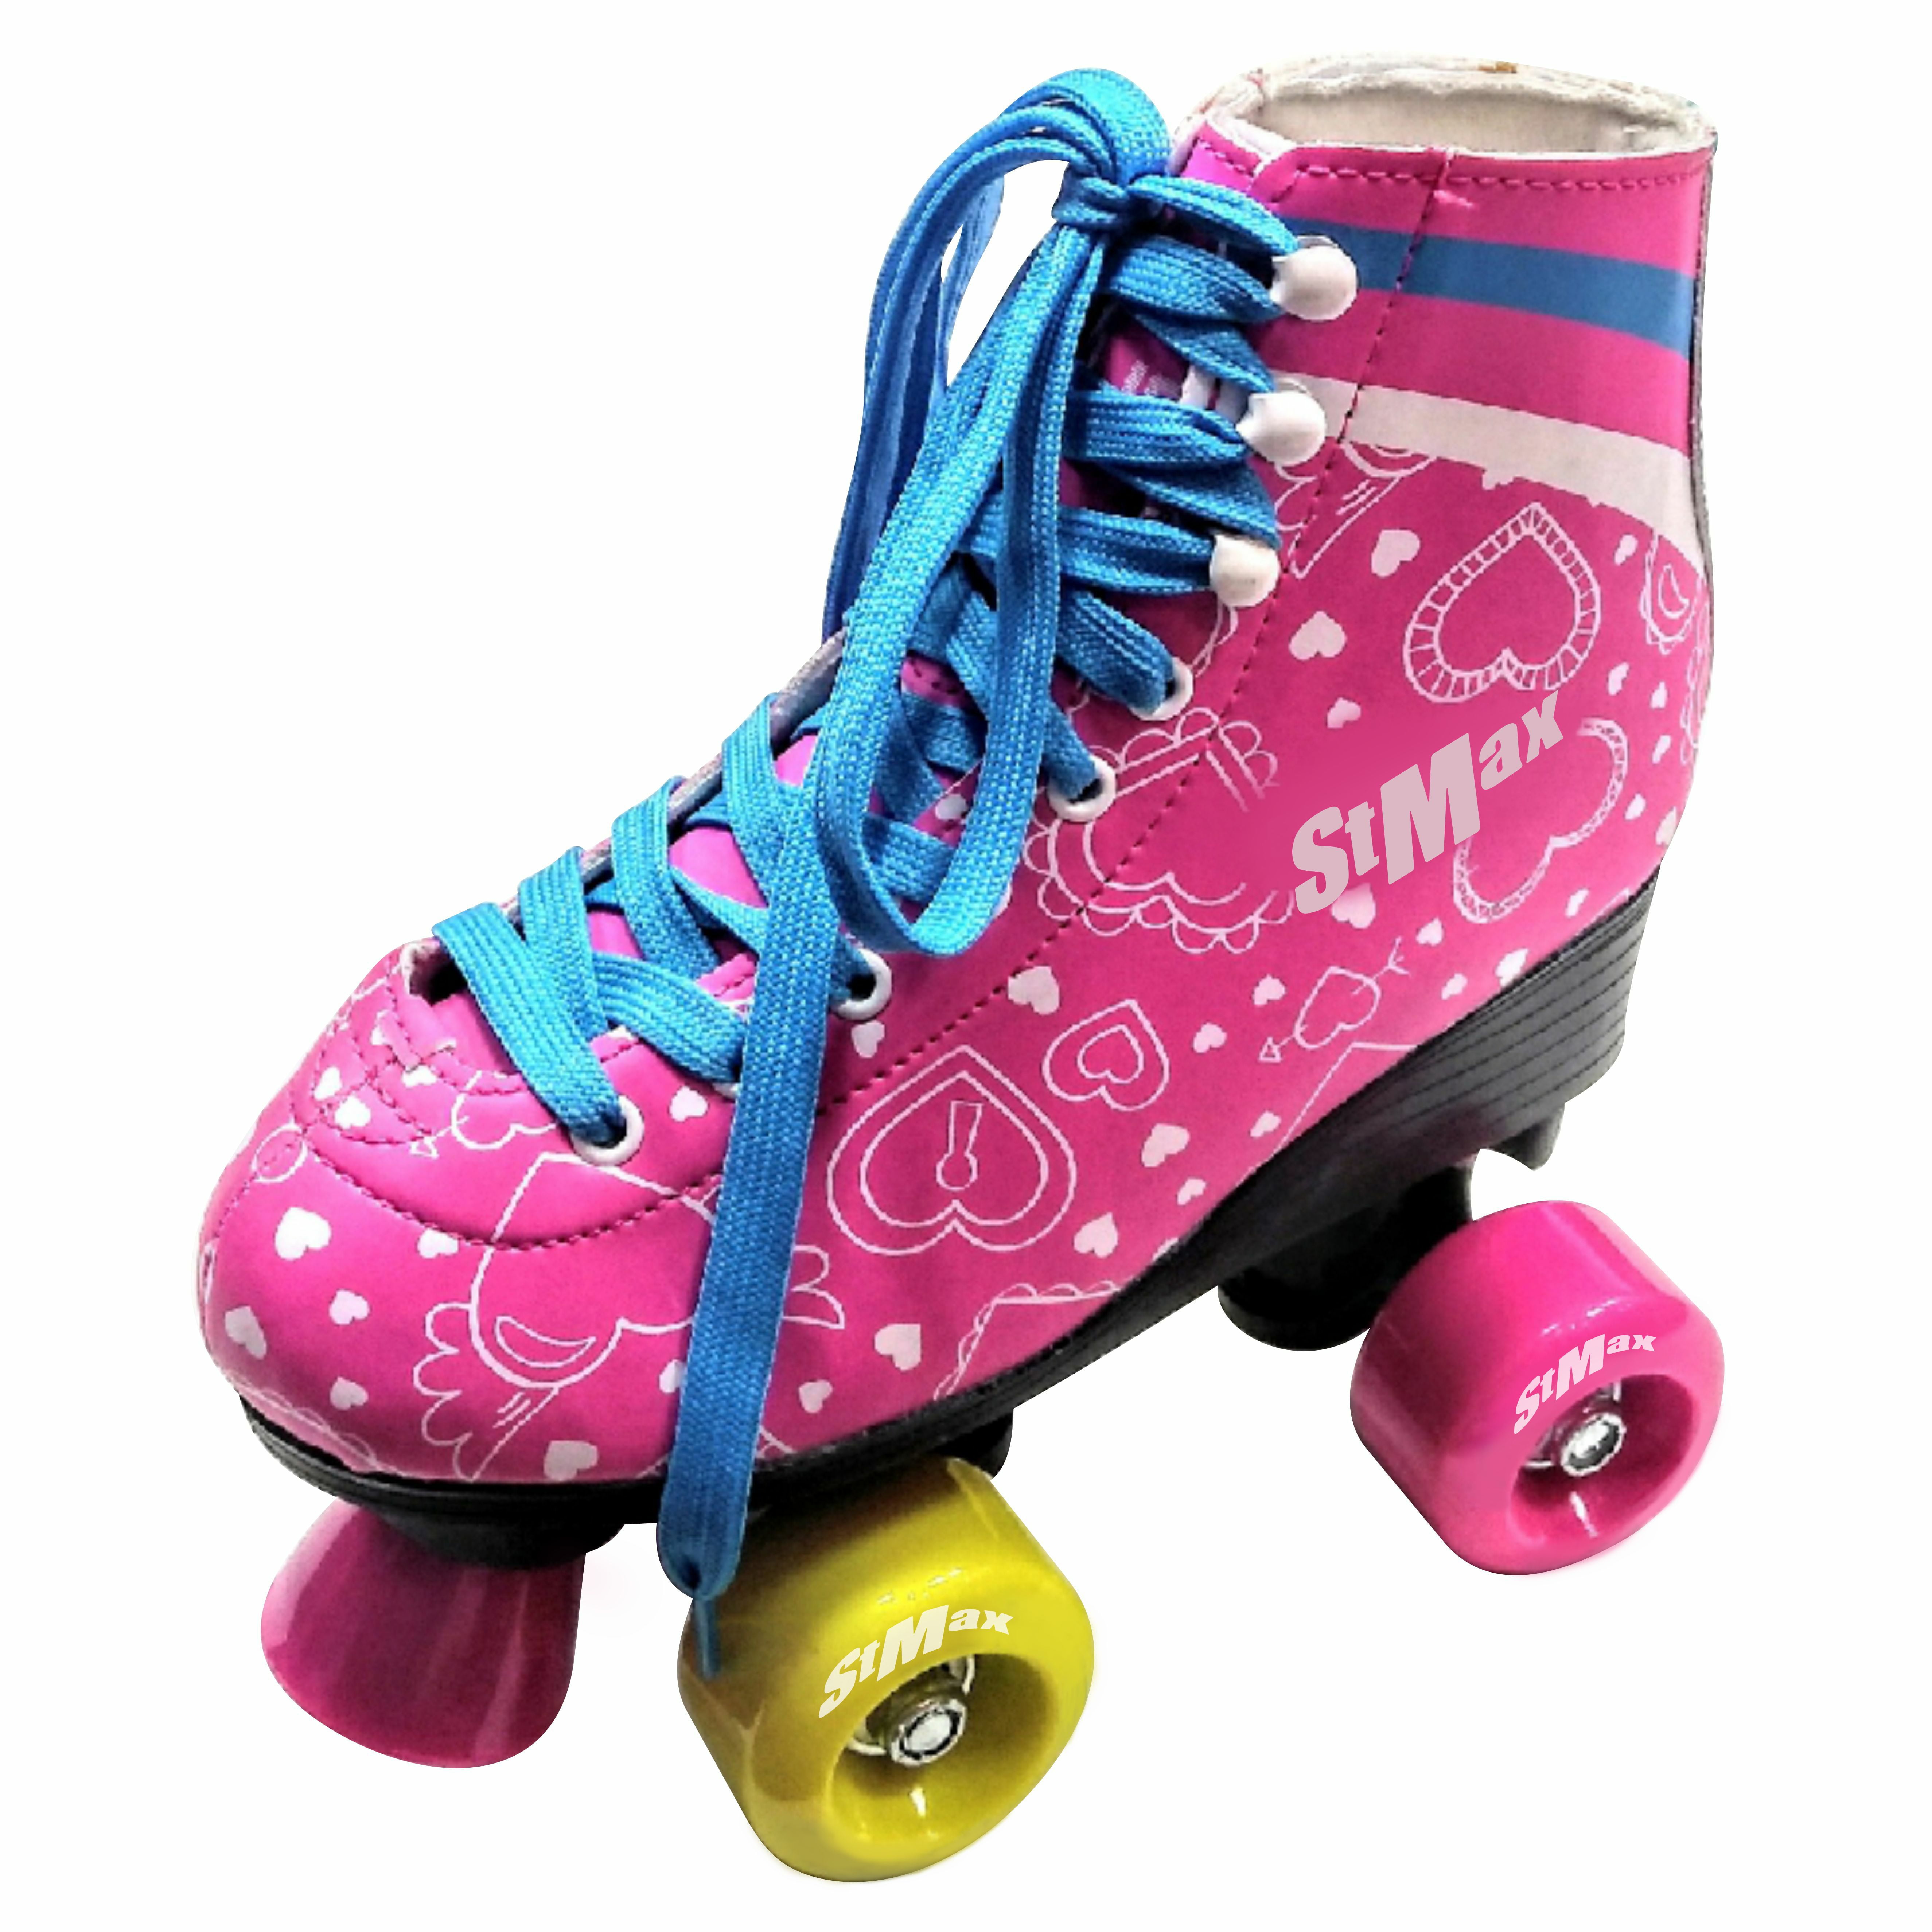 Quad Roller Skates for Girls and Women Size 8.5 Women White and pink Heart Derby 